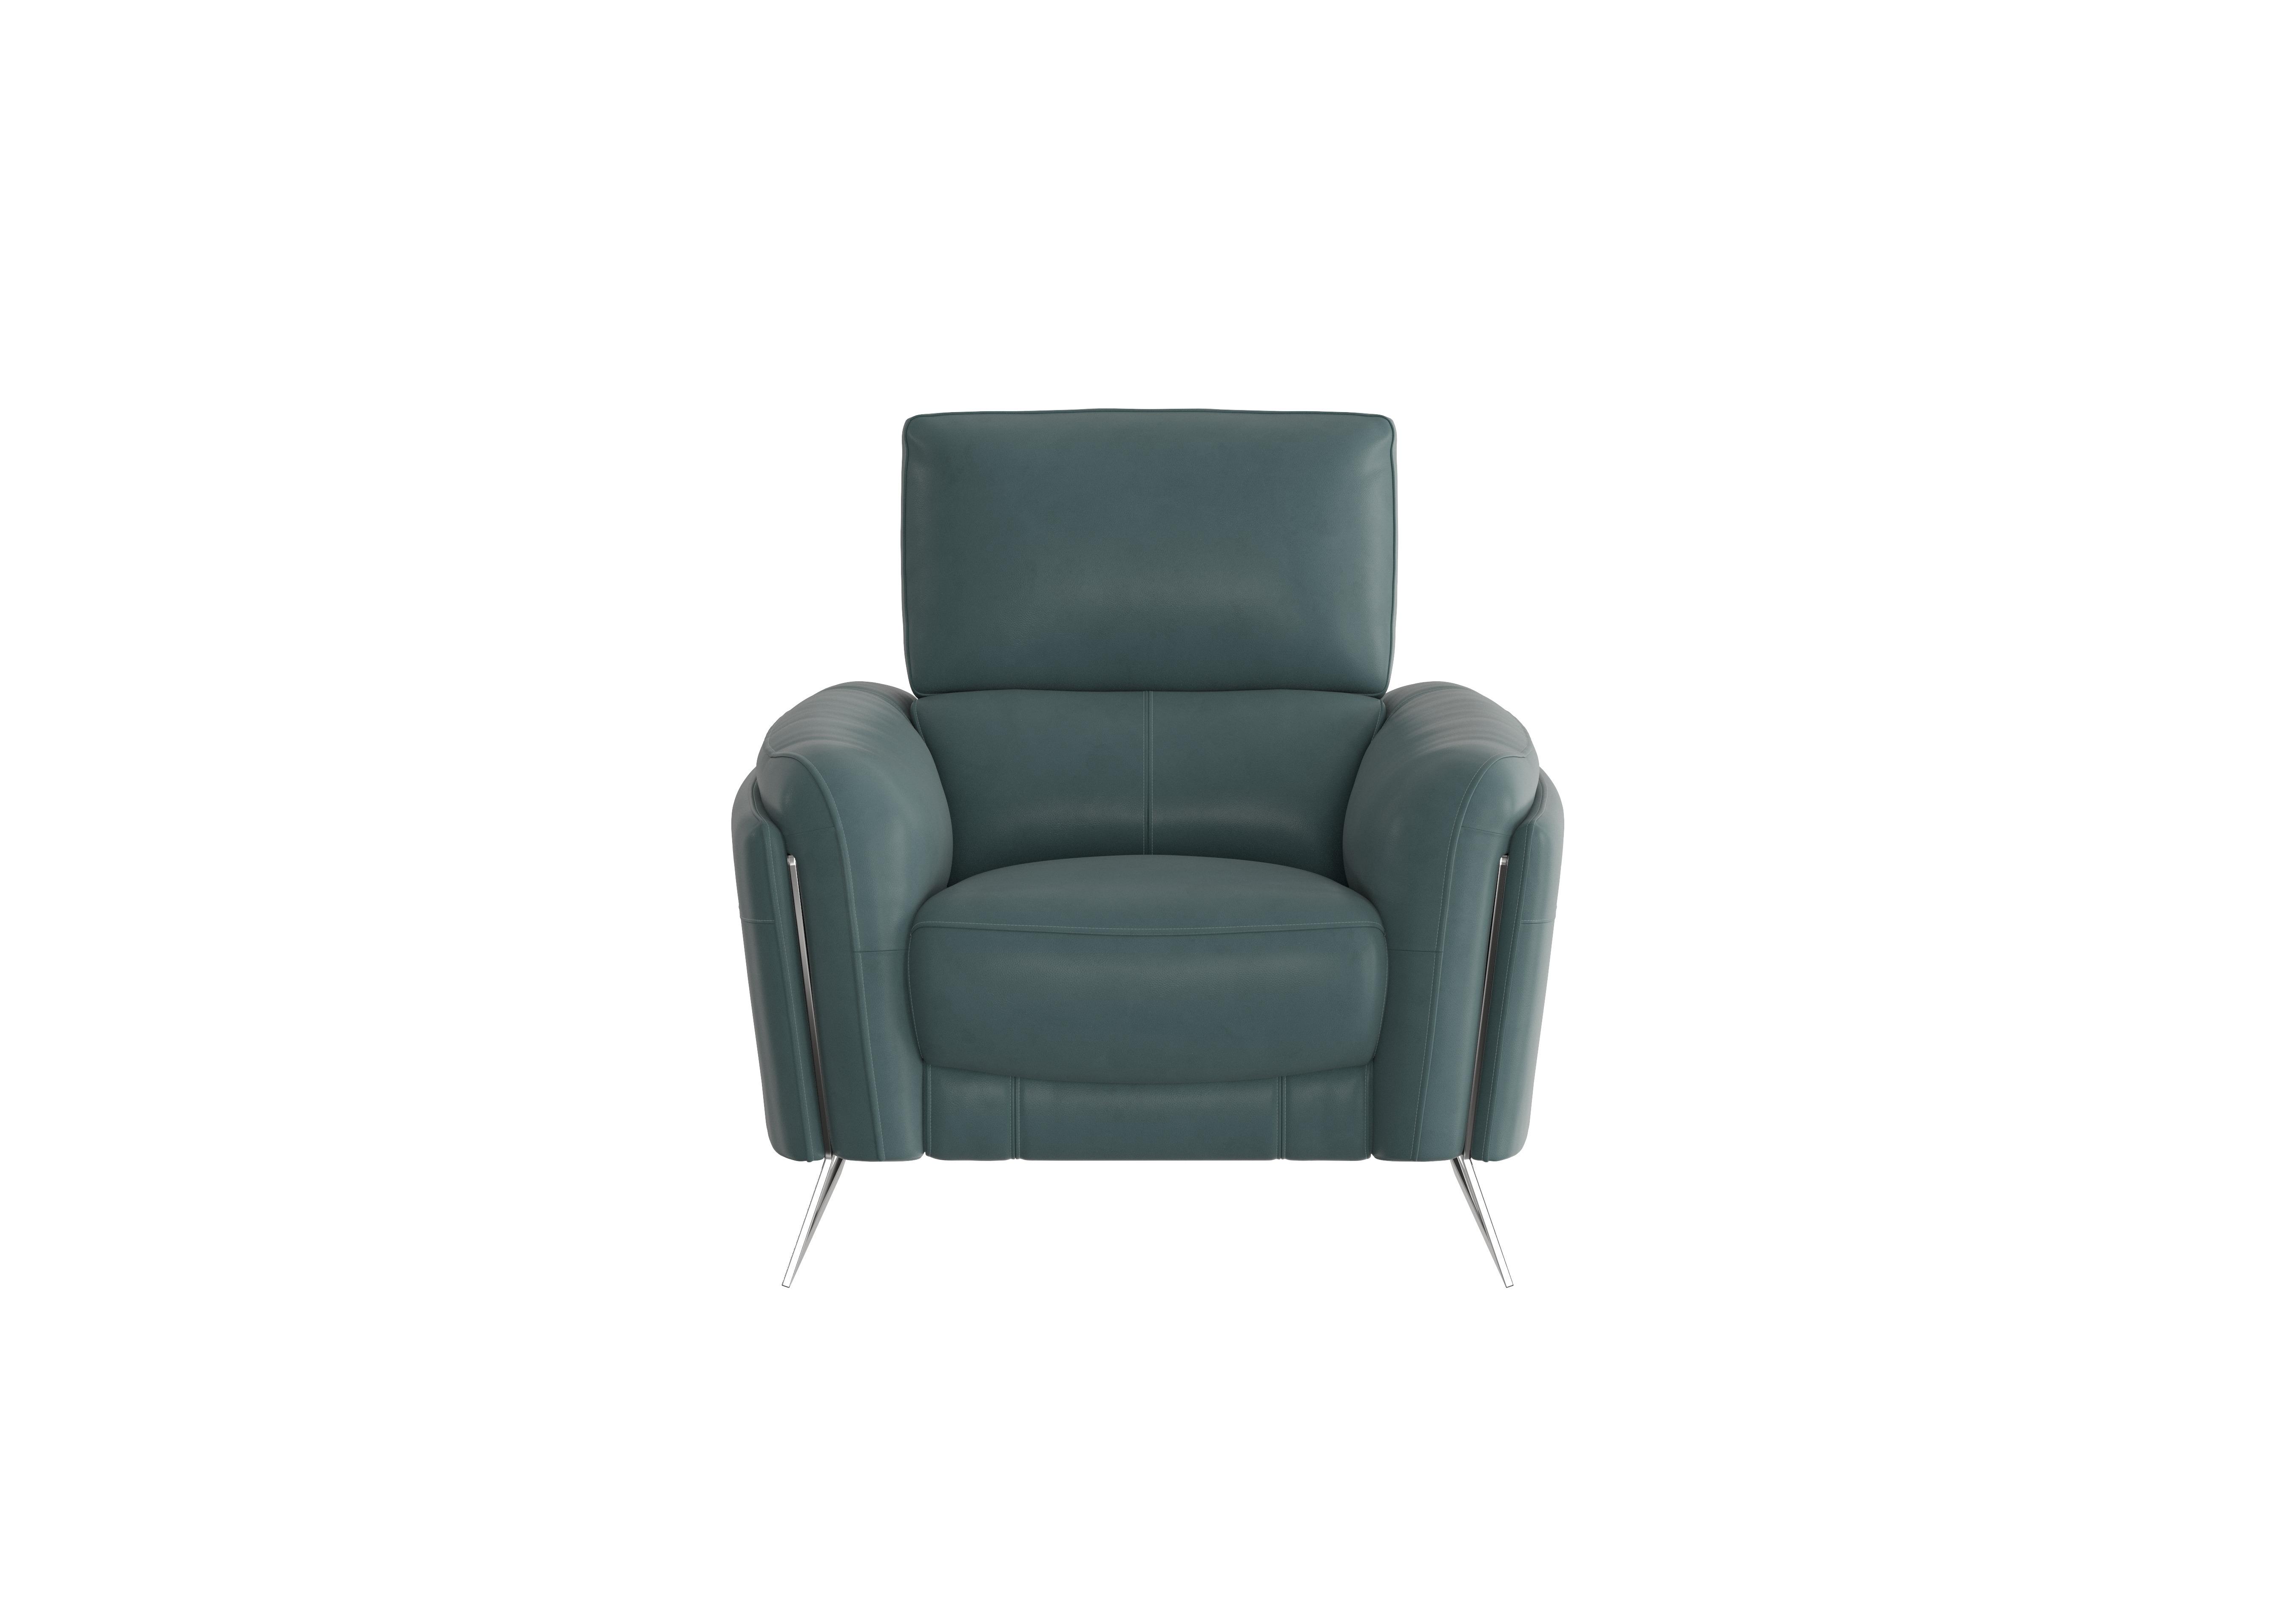 Amarilla Leather Armchair in Bv-301e Lake Green on Furniture Village